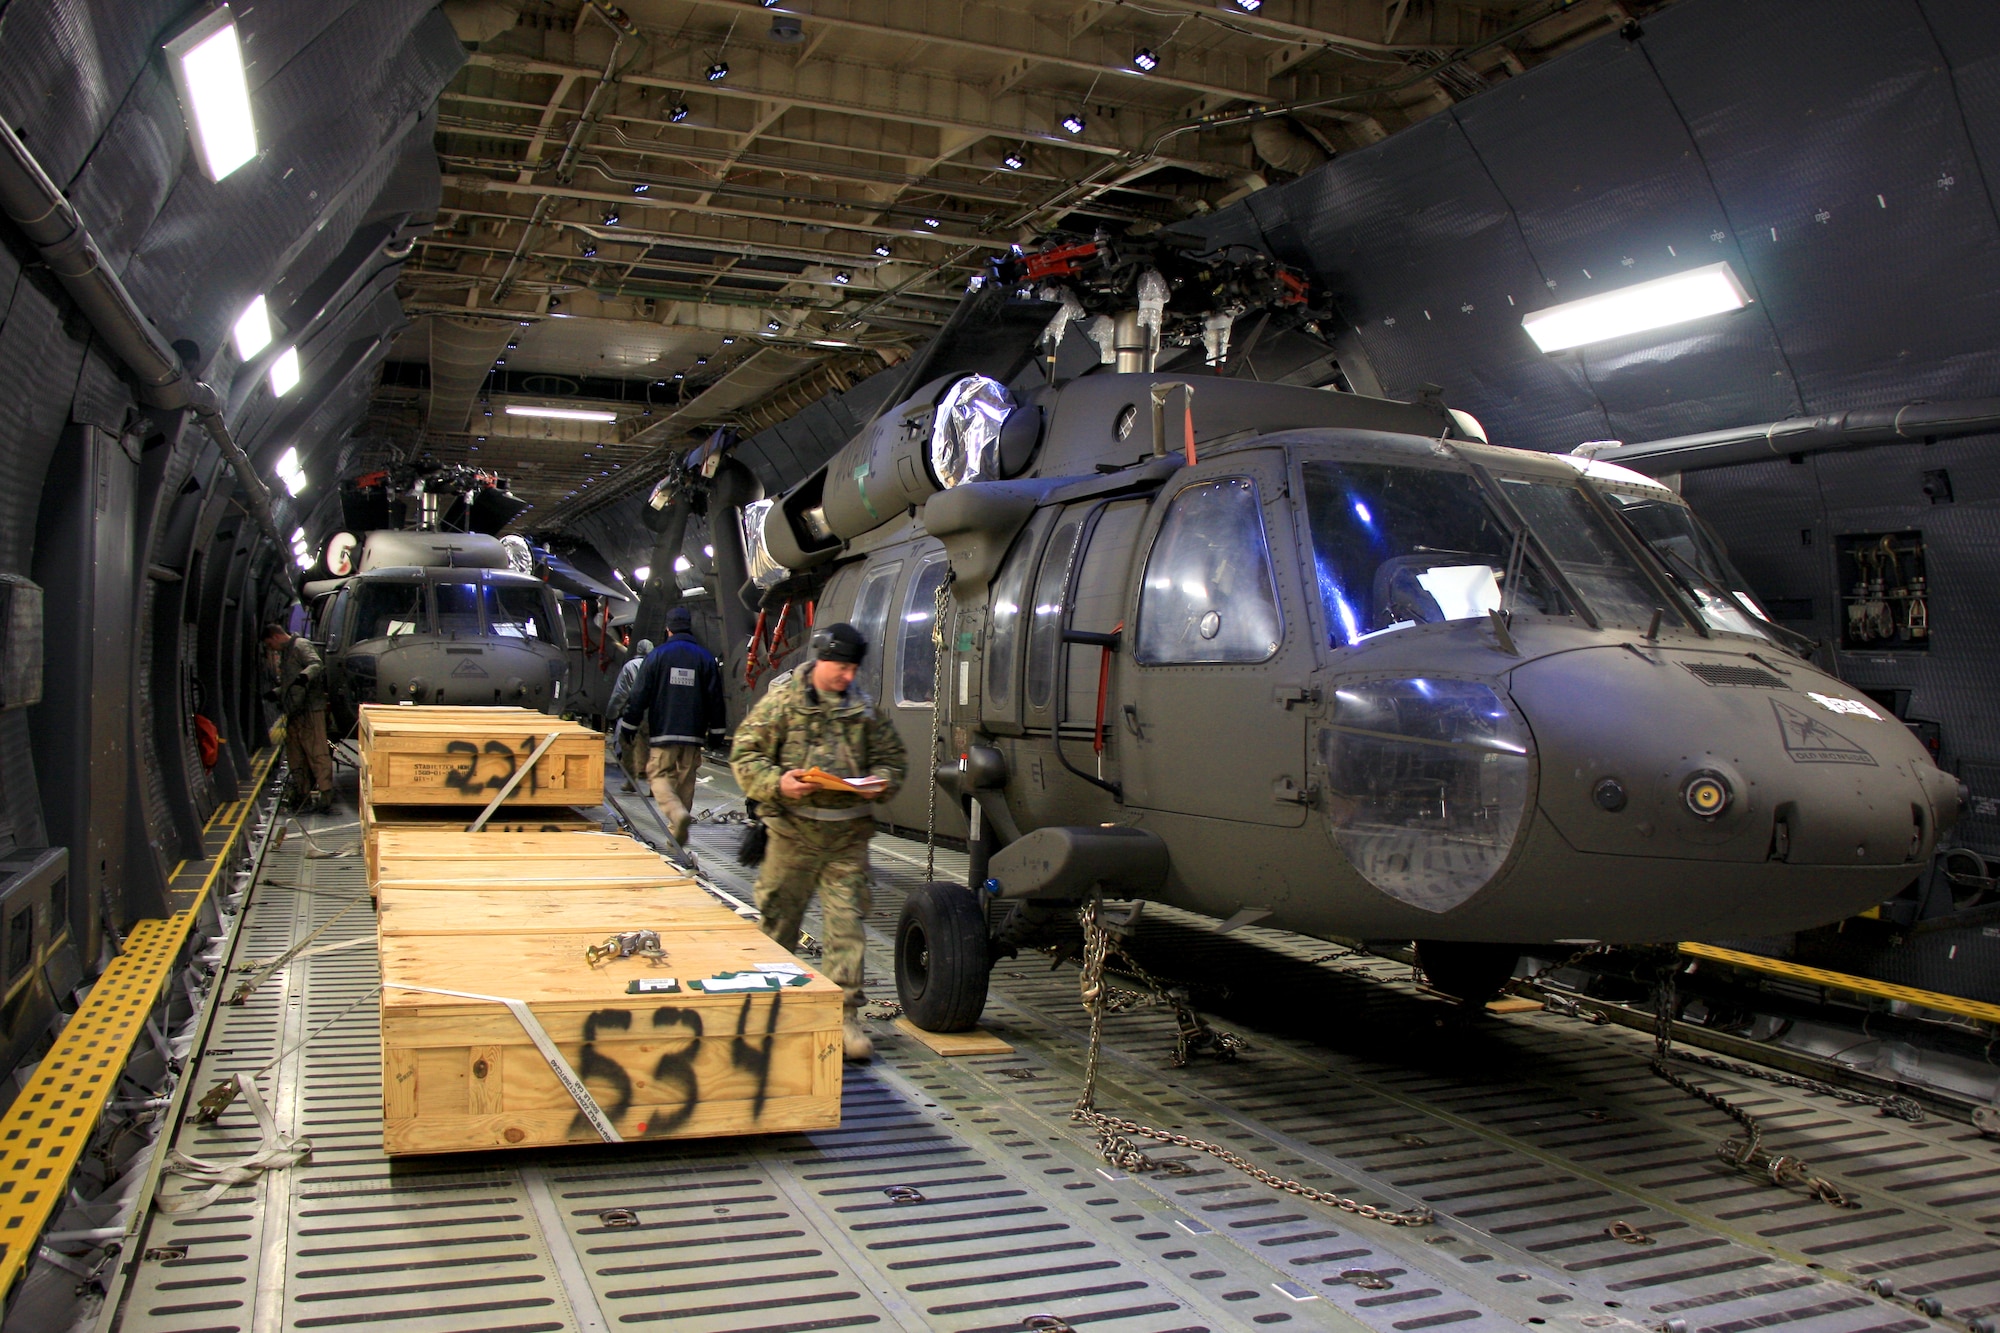 UH-64 Black Hawk helicopters await offload from a C-5M Super Galaxy at Bagram Air Field. The C-5M Super Galaxy has served the U.S. Air Force since 1969, and continues to provide vital heavy air lift to troops worldwide. (U.S. Army photo/1st Lt. Henry Chan, 18th Combat Sustainment Support Battalion Public Affairs)